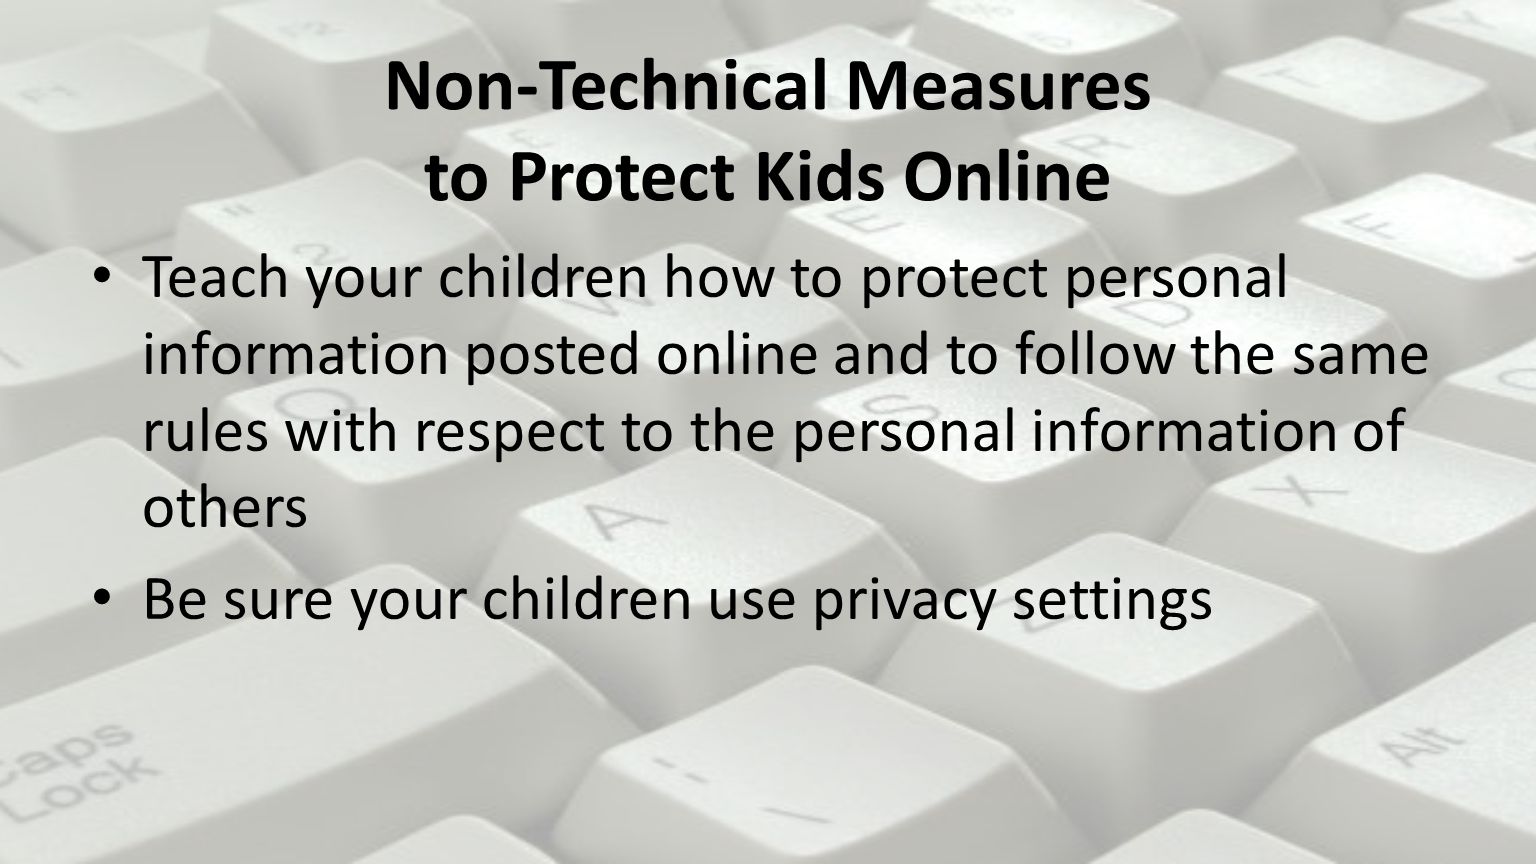 Non-Technical Measures to Protect Kids Online Teach your children how to protect personal information posted online and to follow the same rules with respect to the personal information of others Be sure your children use privacy settings